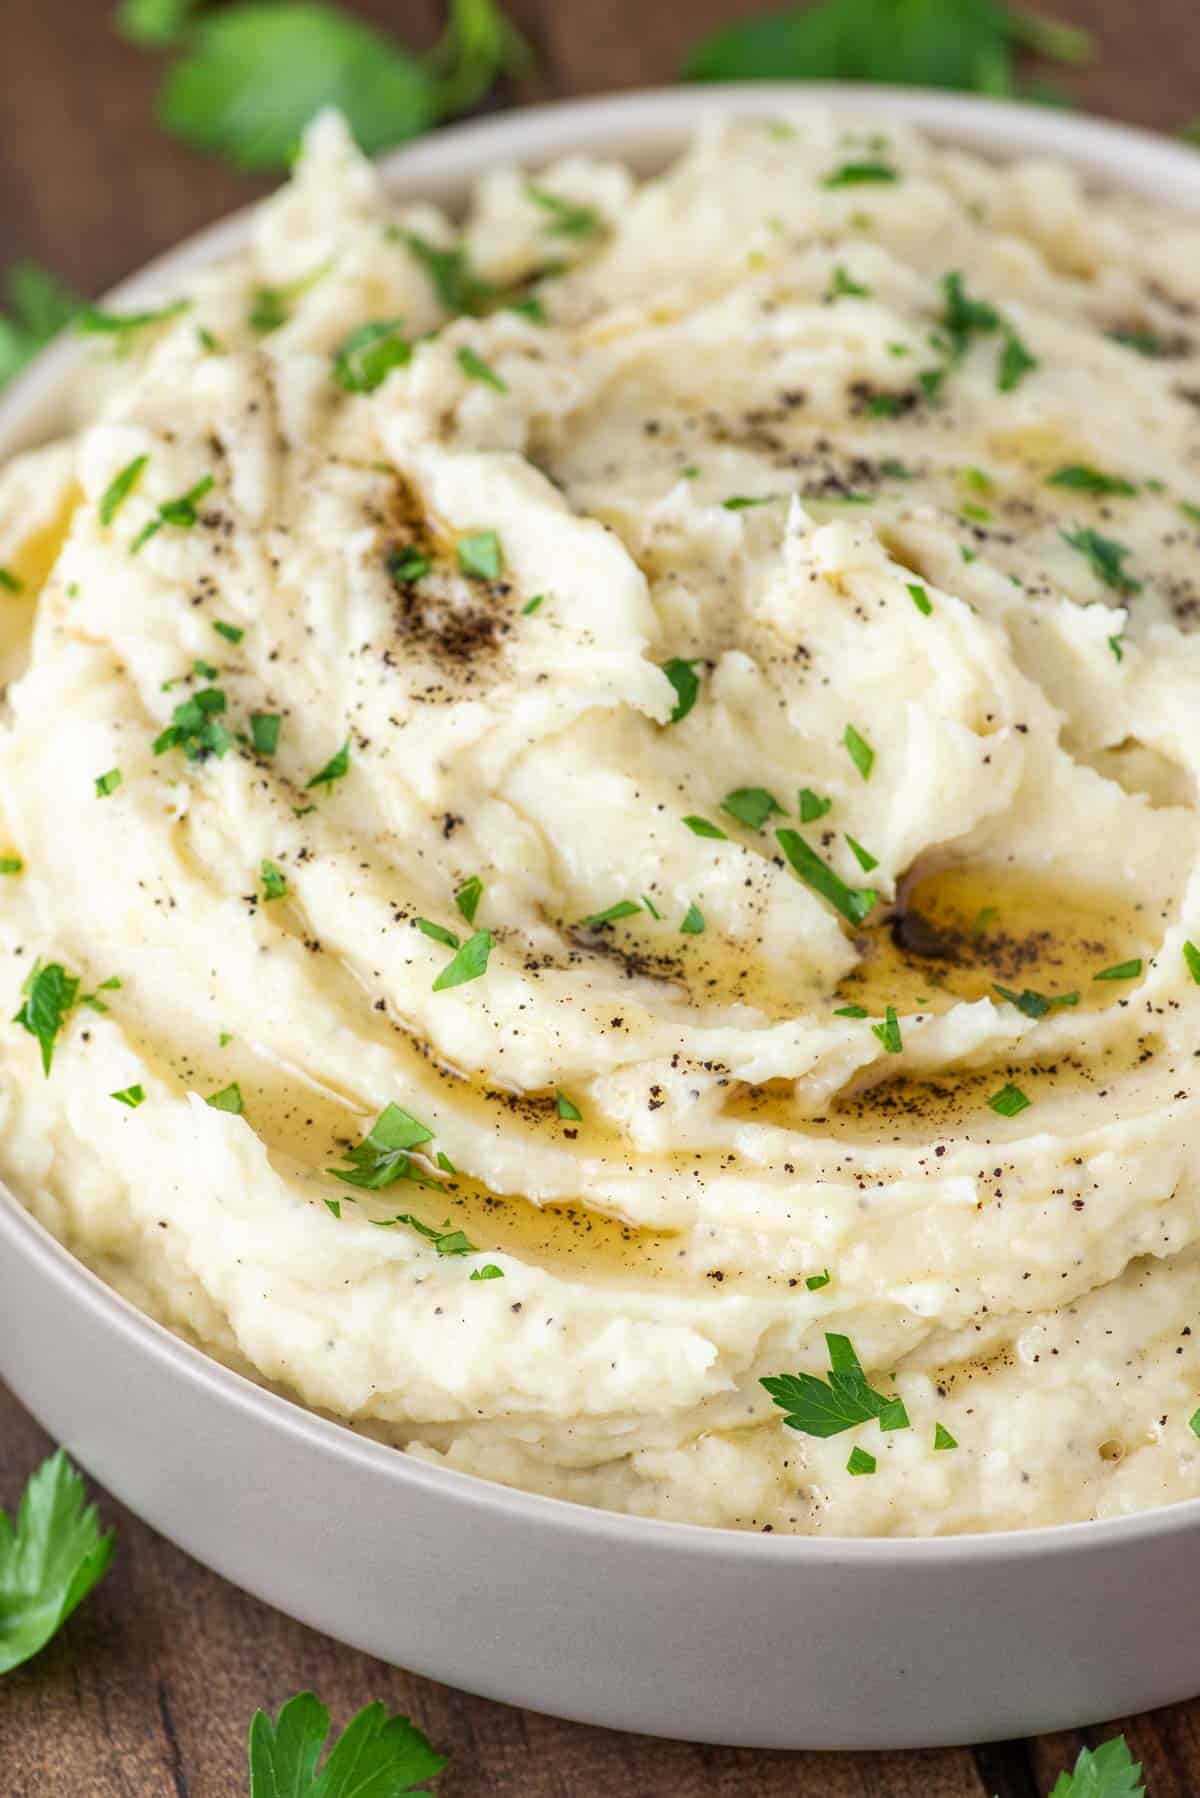 grey bowl of mashed potatoes made with brown butter